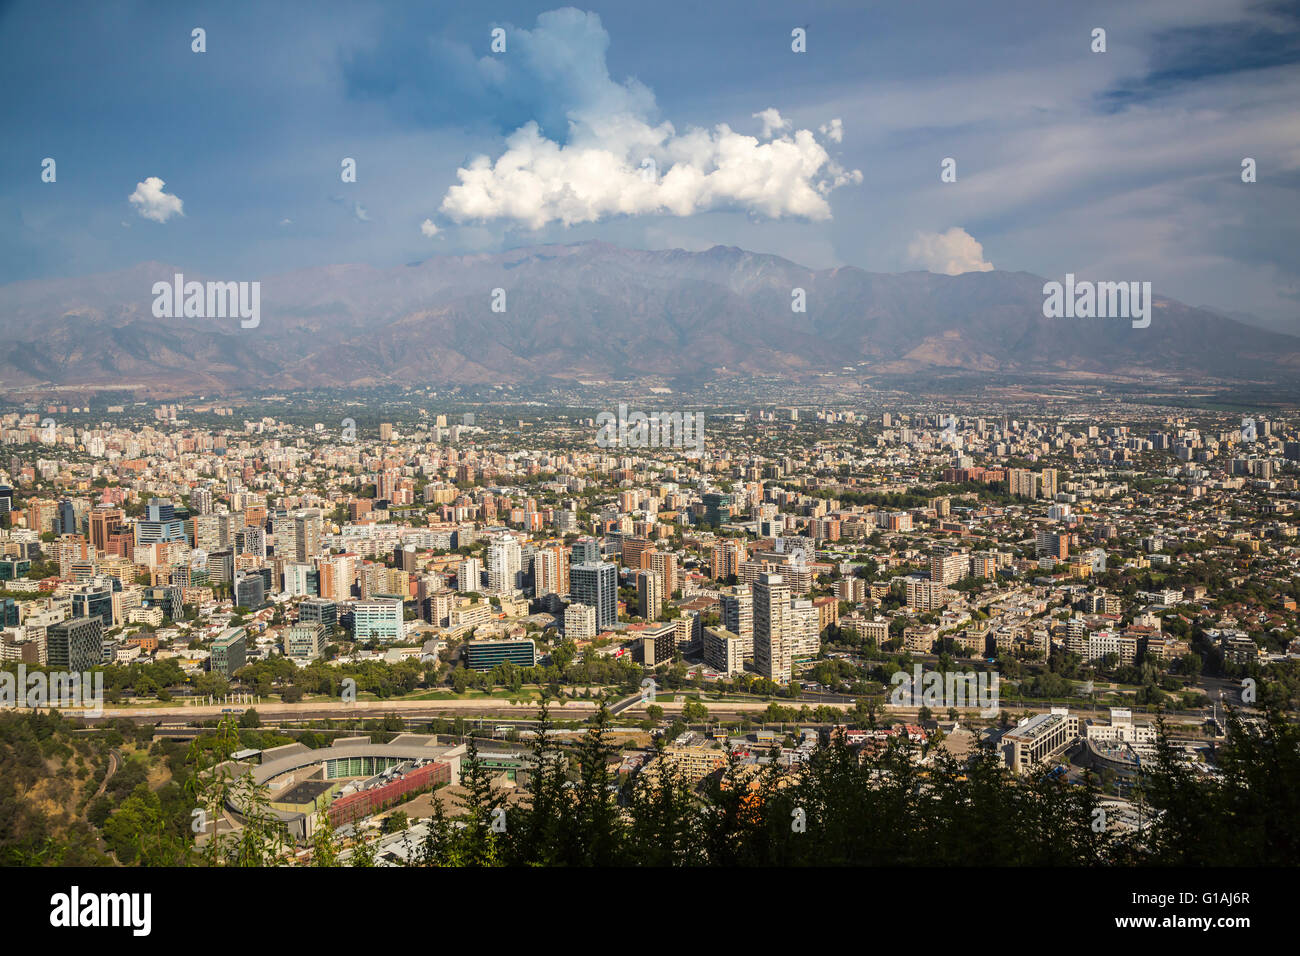 The city skyline with clouds over the Andes Mountains in Santiago, Chile, South America. Stock Photo